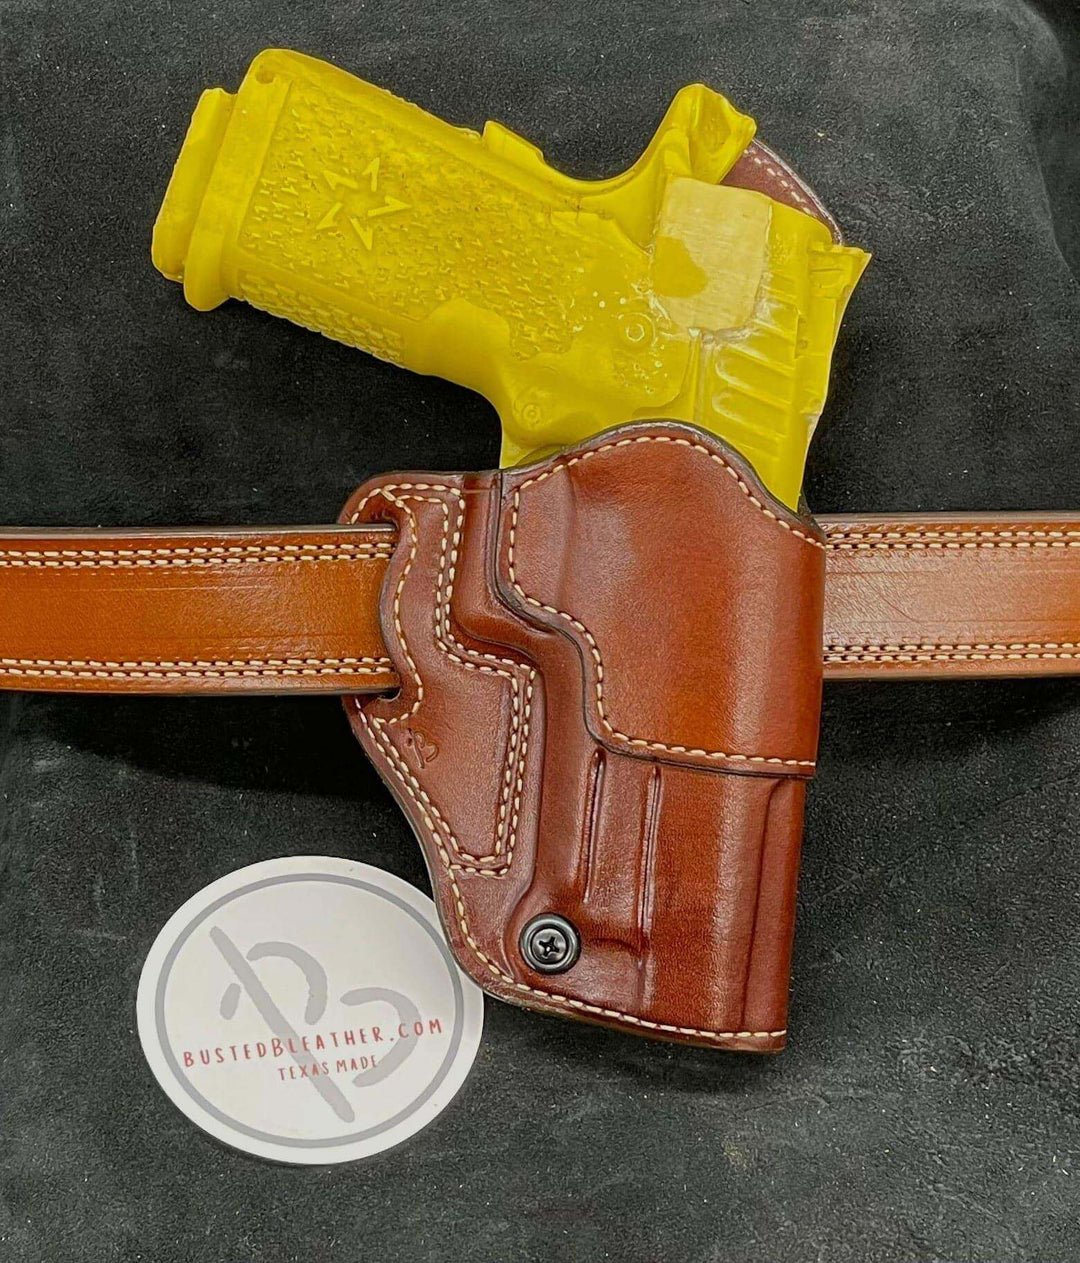 *Made to Order* LH/RH Raptor Holster for Red Dot Optics Made for Your Gun-Busted B Leather